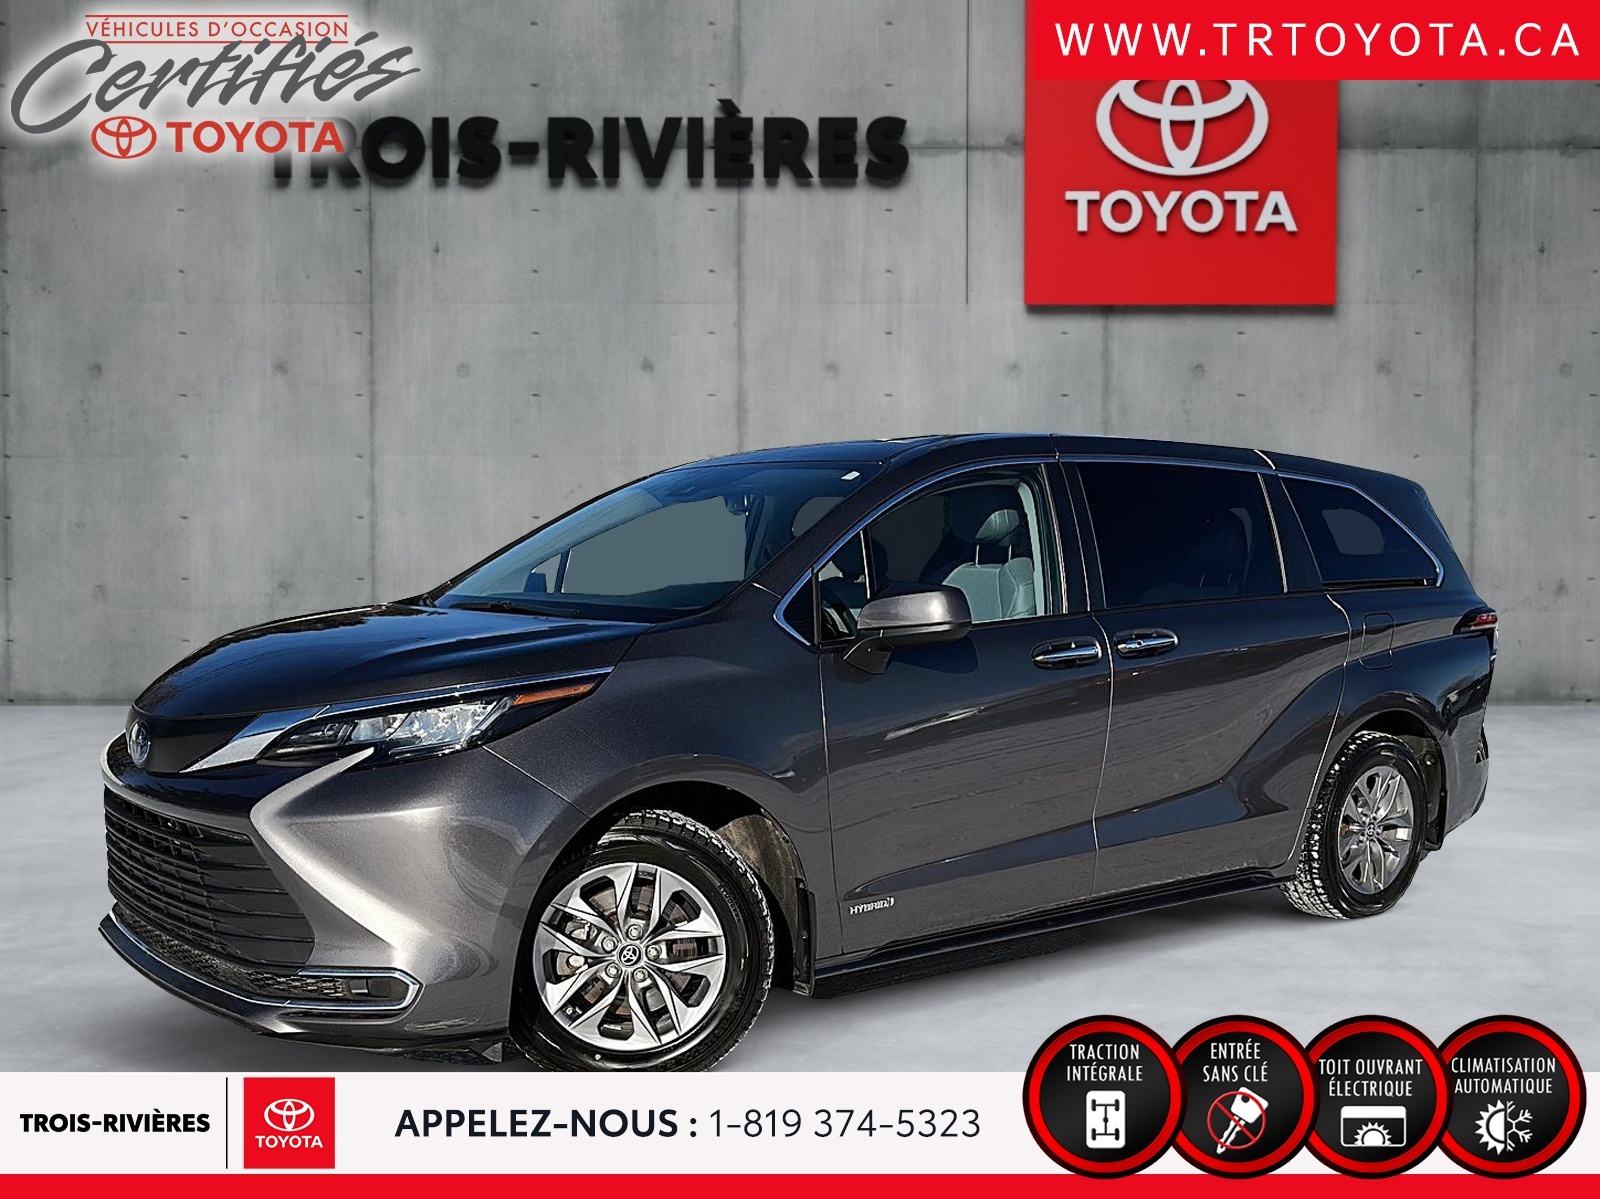 2021 Toyota Sienna XLE AWD TOIT OUVRANT 7 places